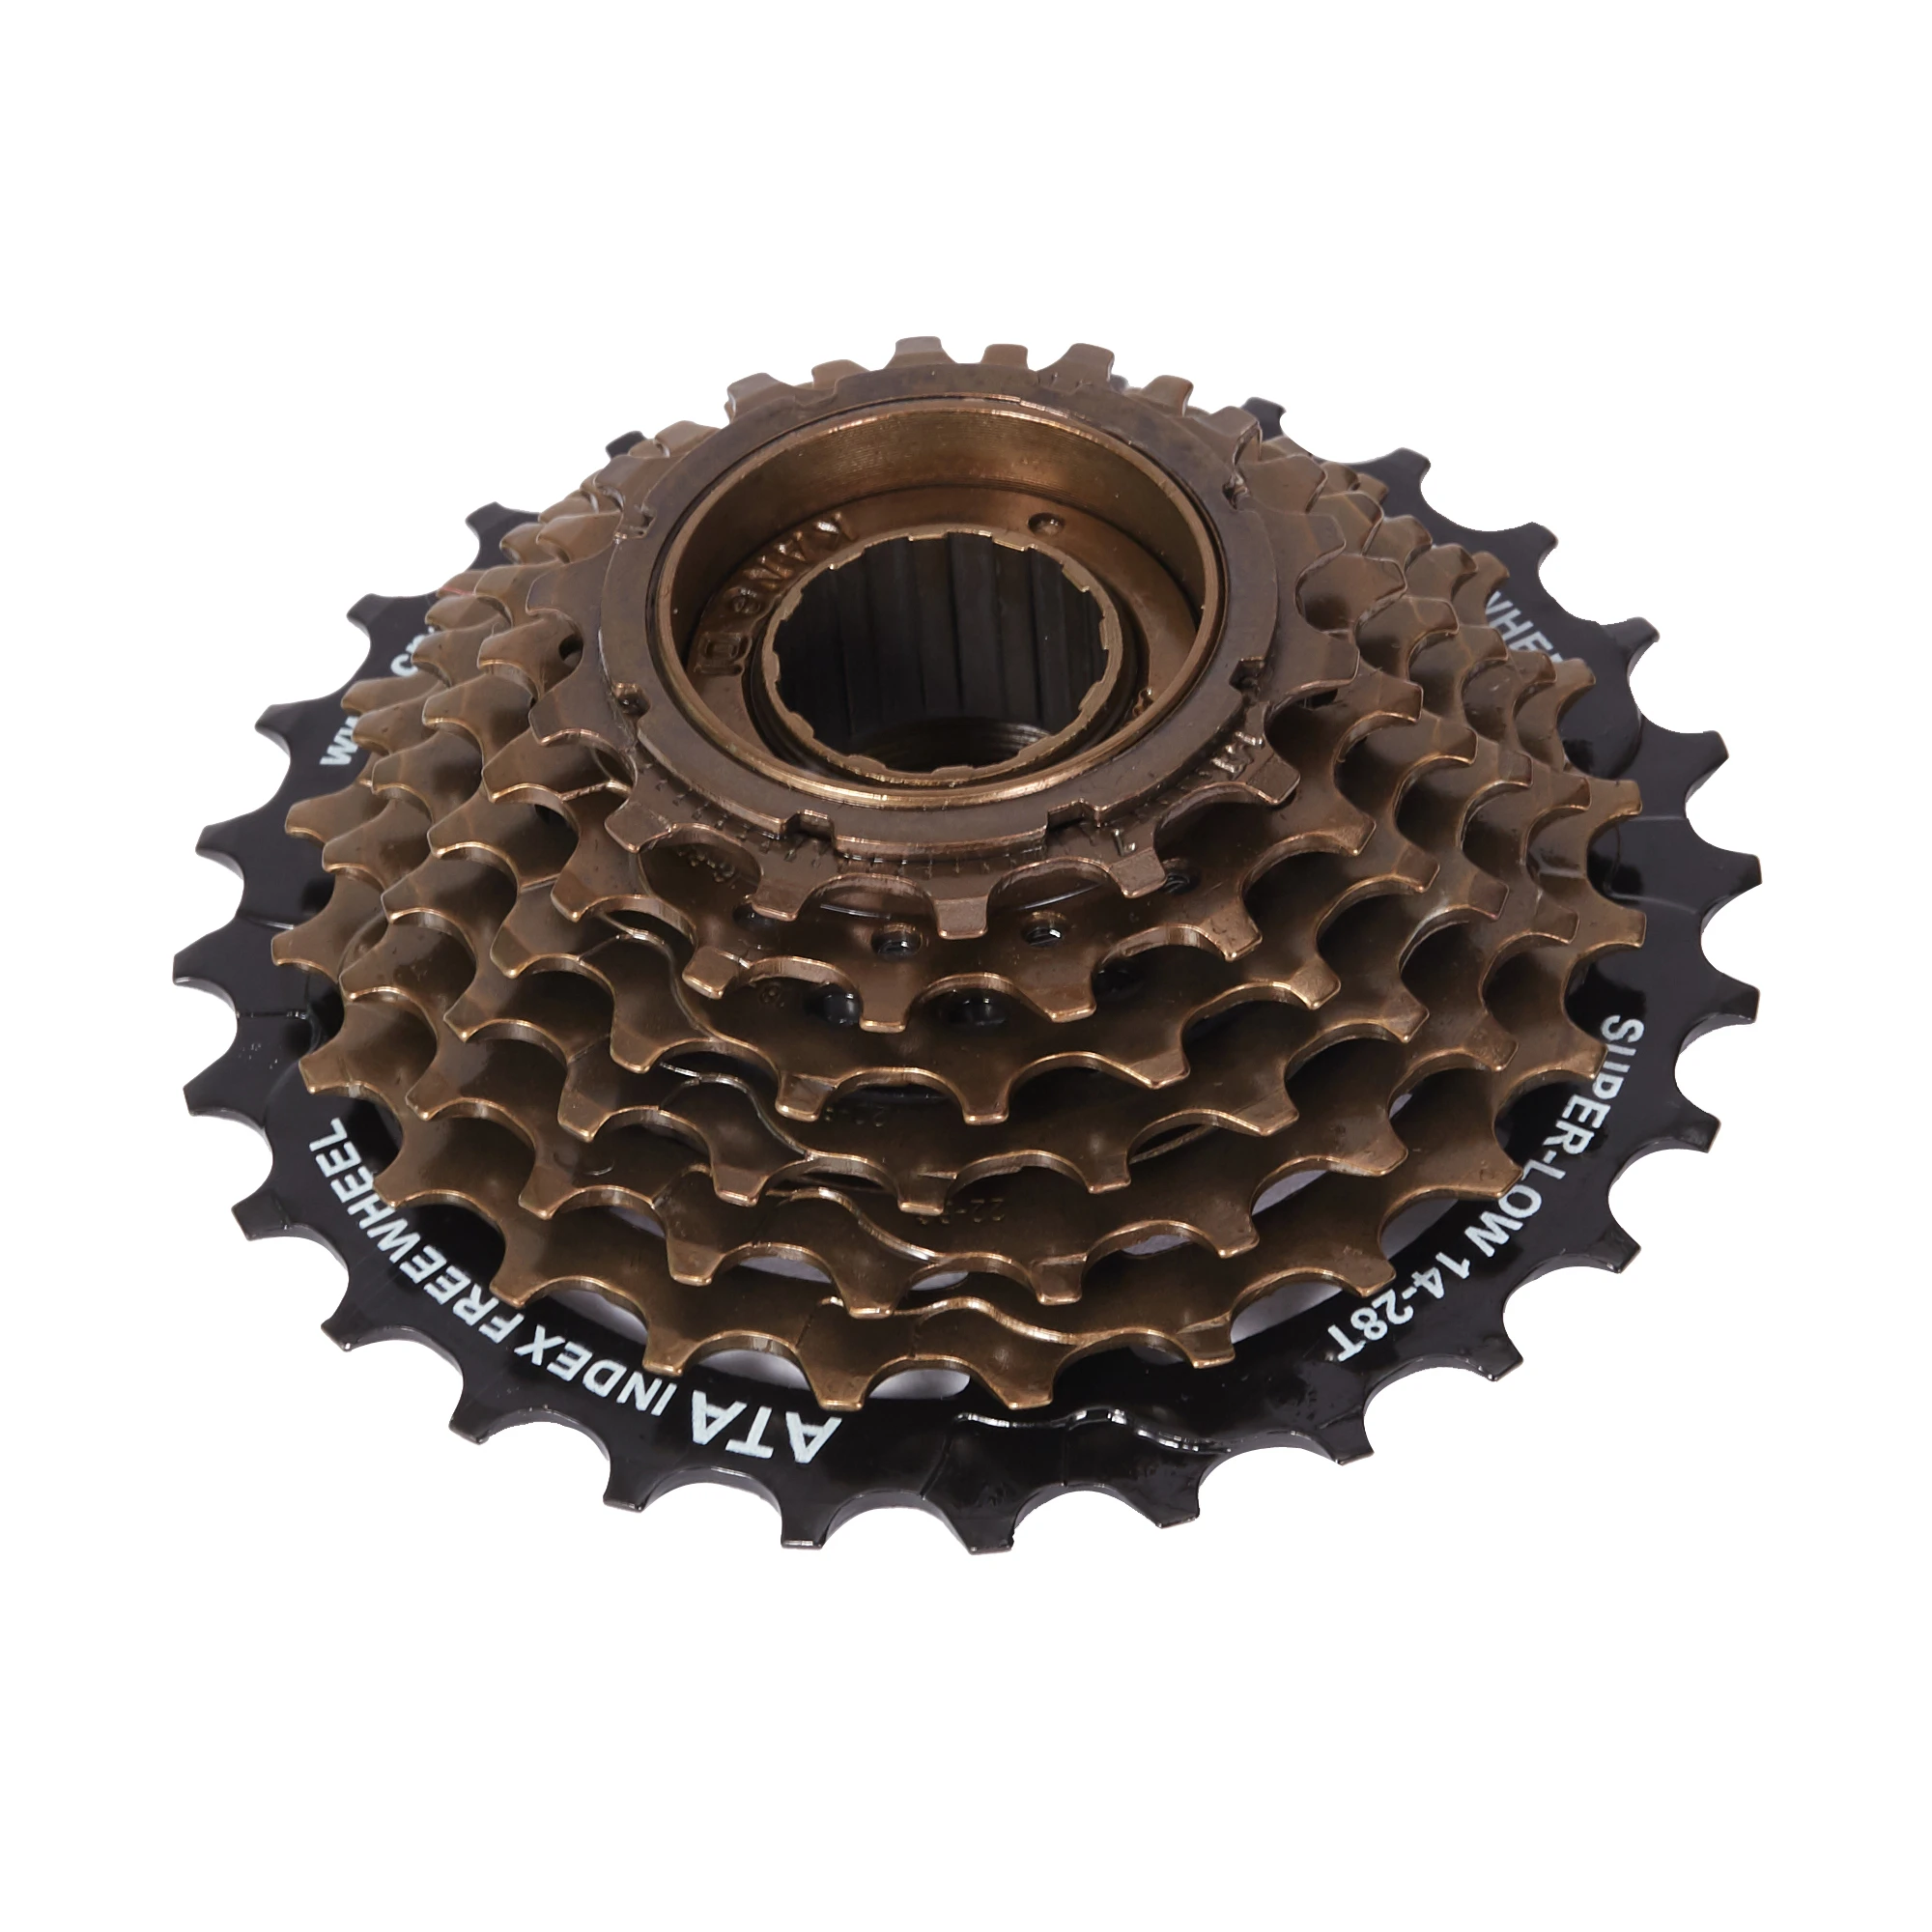 Bicycles Ebike 6 7 8 9 10 11 Speed Thread on Freewheel or Cassette for MTB Road Cycling Bike or electric bicycle